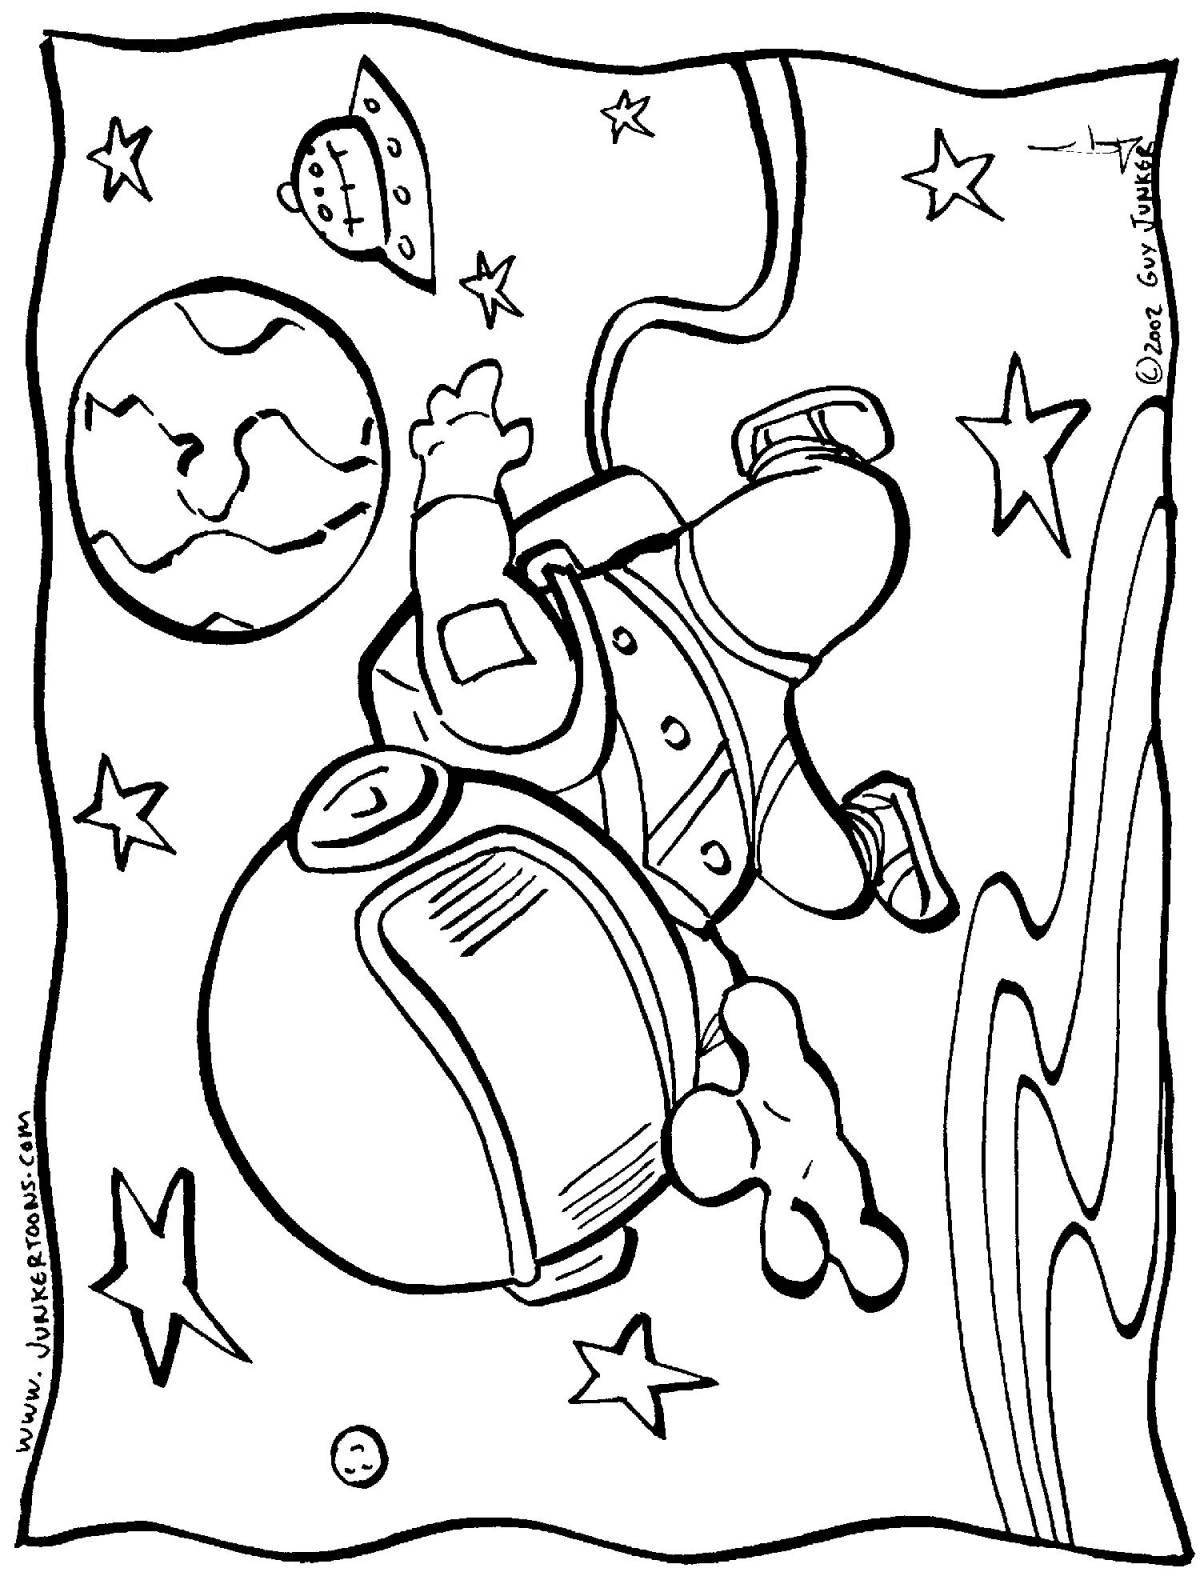 Exciting space coloring book for kids